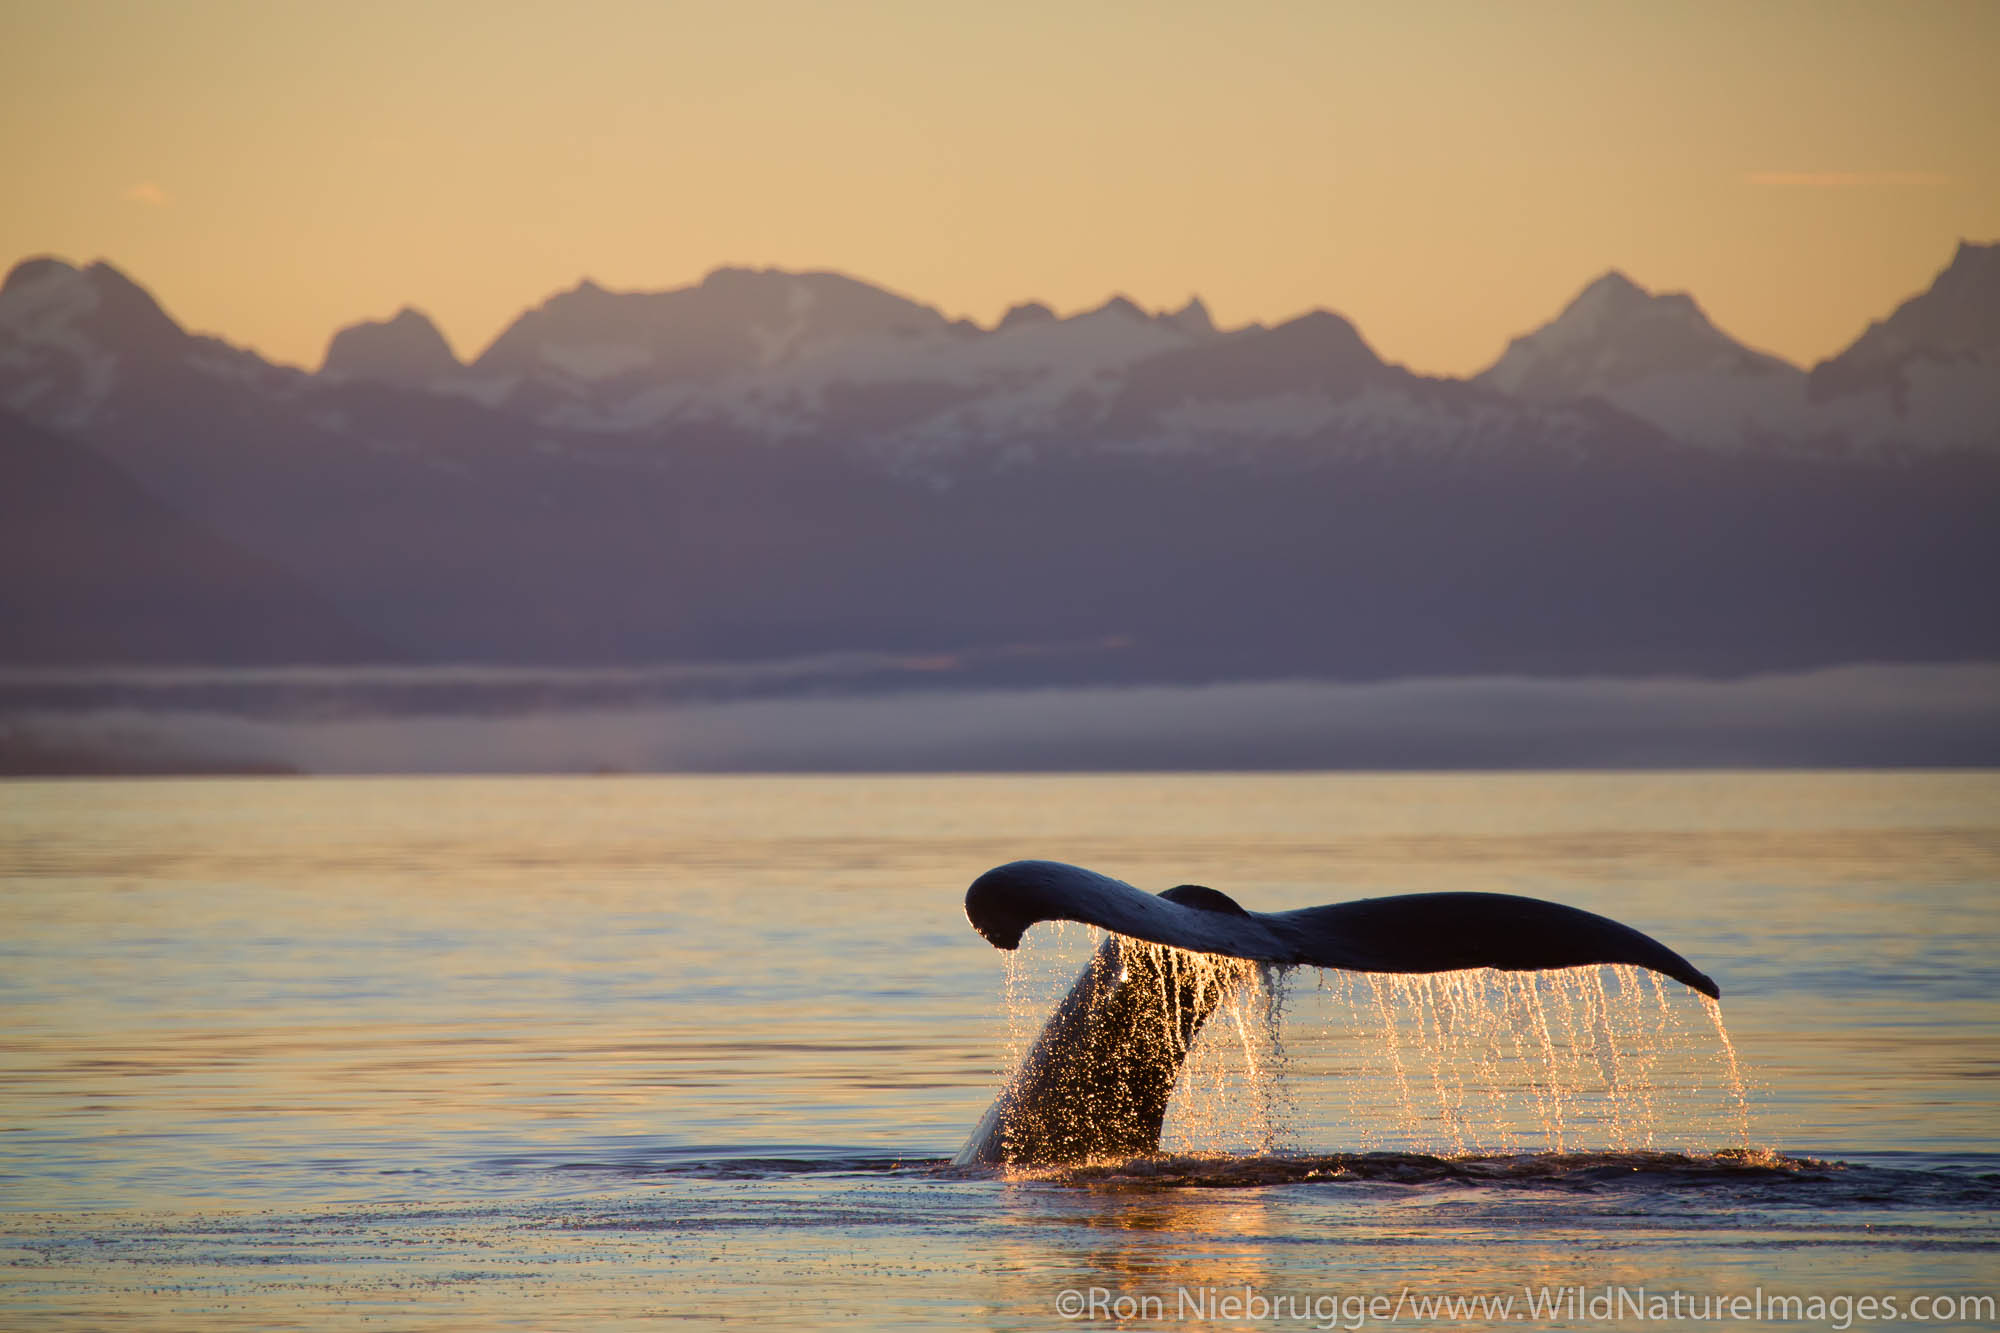 Humpback whale tail at sunrise, Tongass National Forest, Alaska.